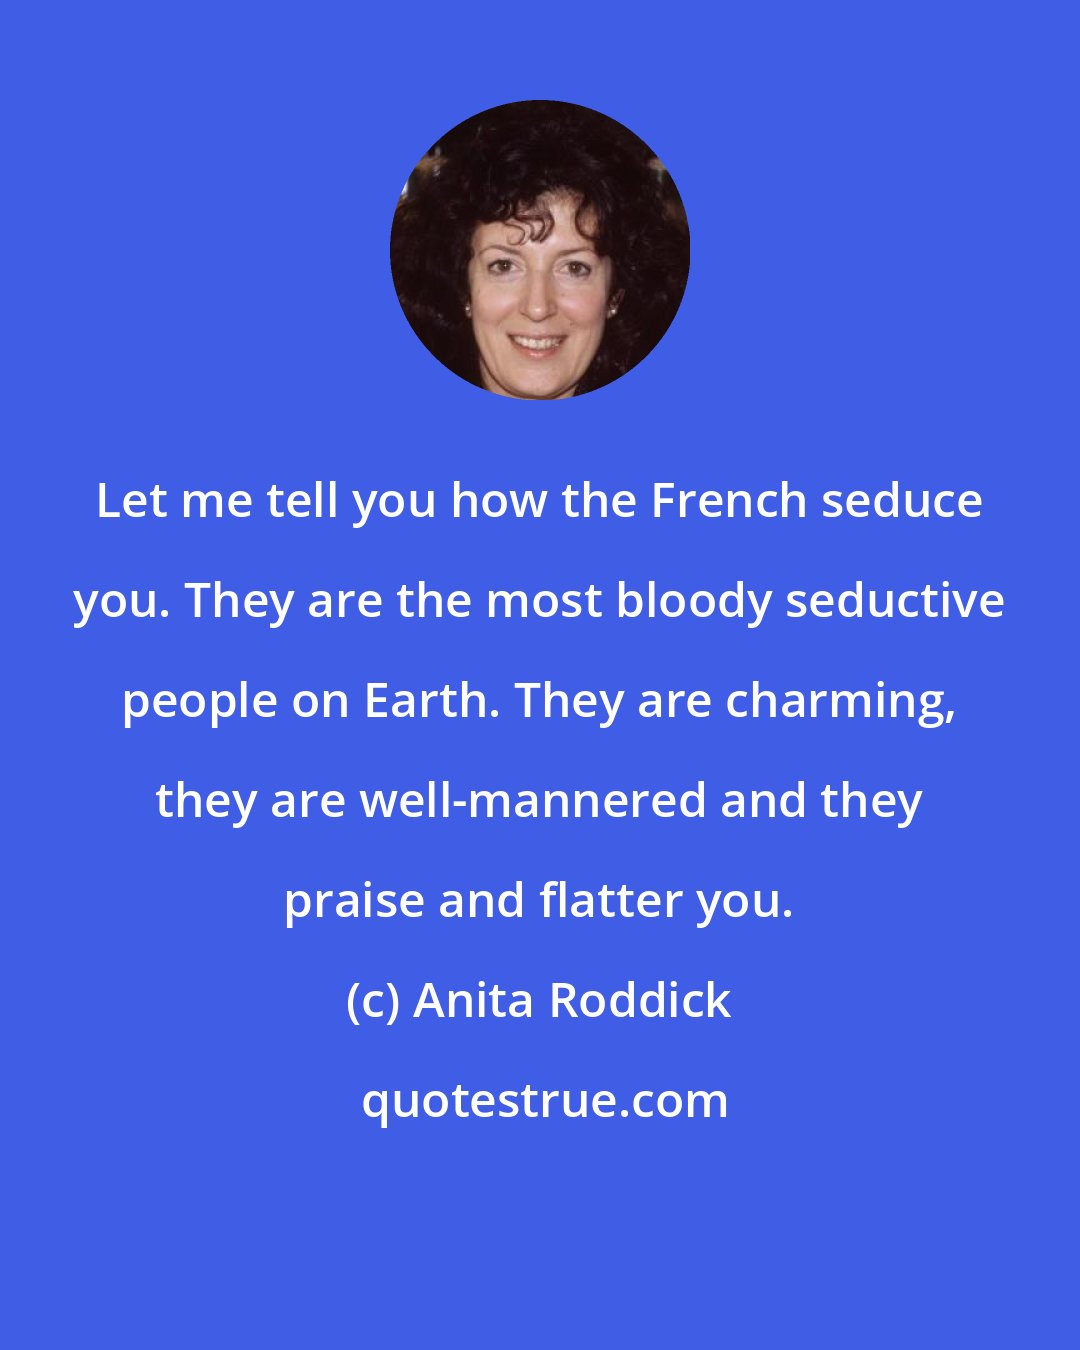 Anita Roddick: Let me tell you how the French seduce you. They are the most bloody seductive people on Earth. They are charming, they are well-mannered and they praise and flatter you.